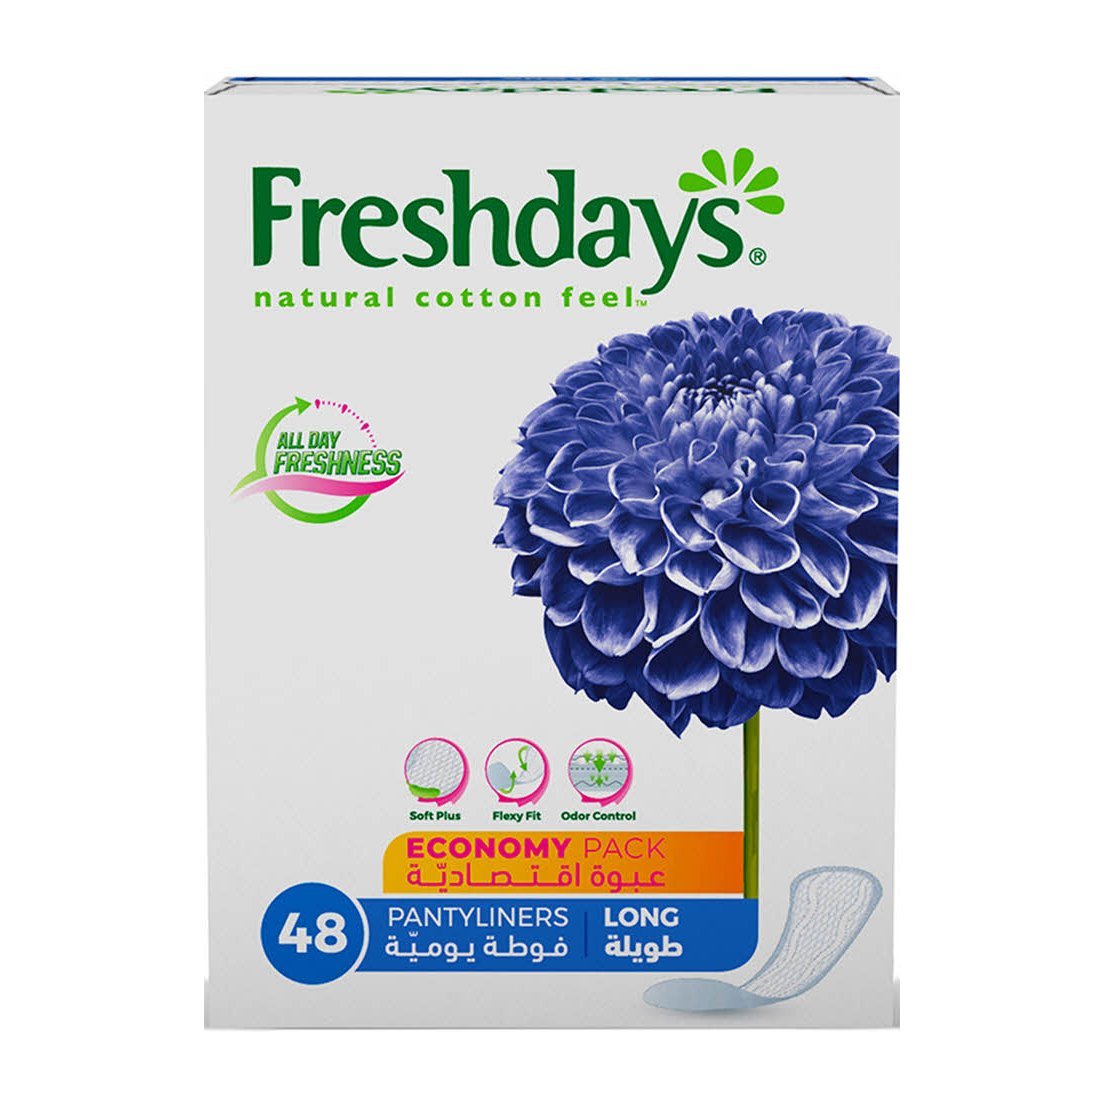 Freshdays Daily Comfort Odor Control Long - 48 Pantyliners - Bloom Pharmacy